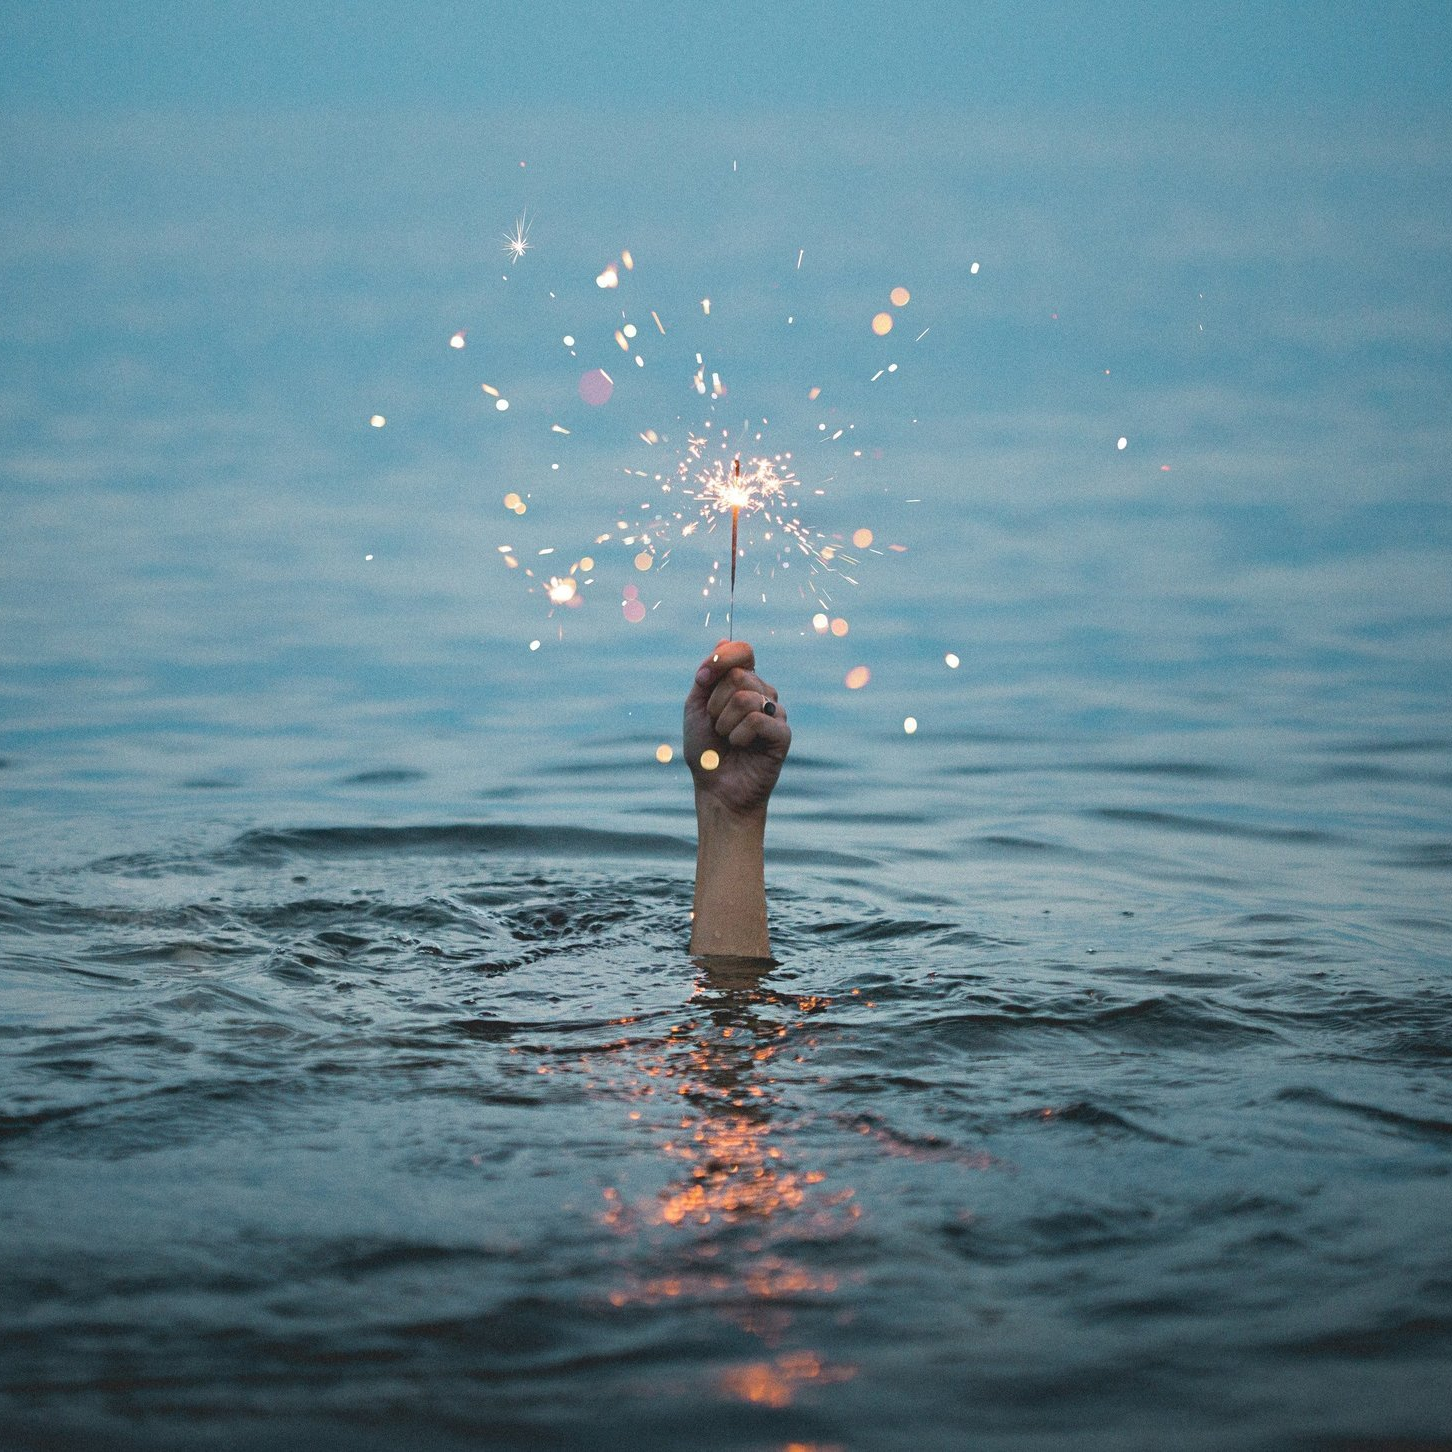 Hand reaching out of a body of water holding a sparkler up to keep it from getting extinguished.